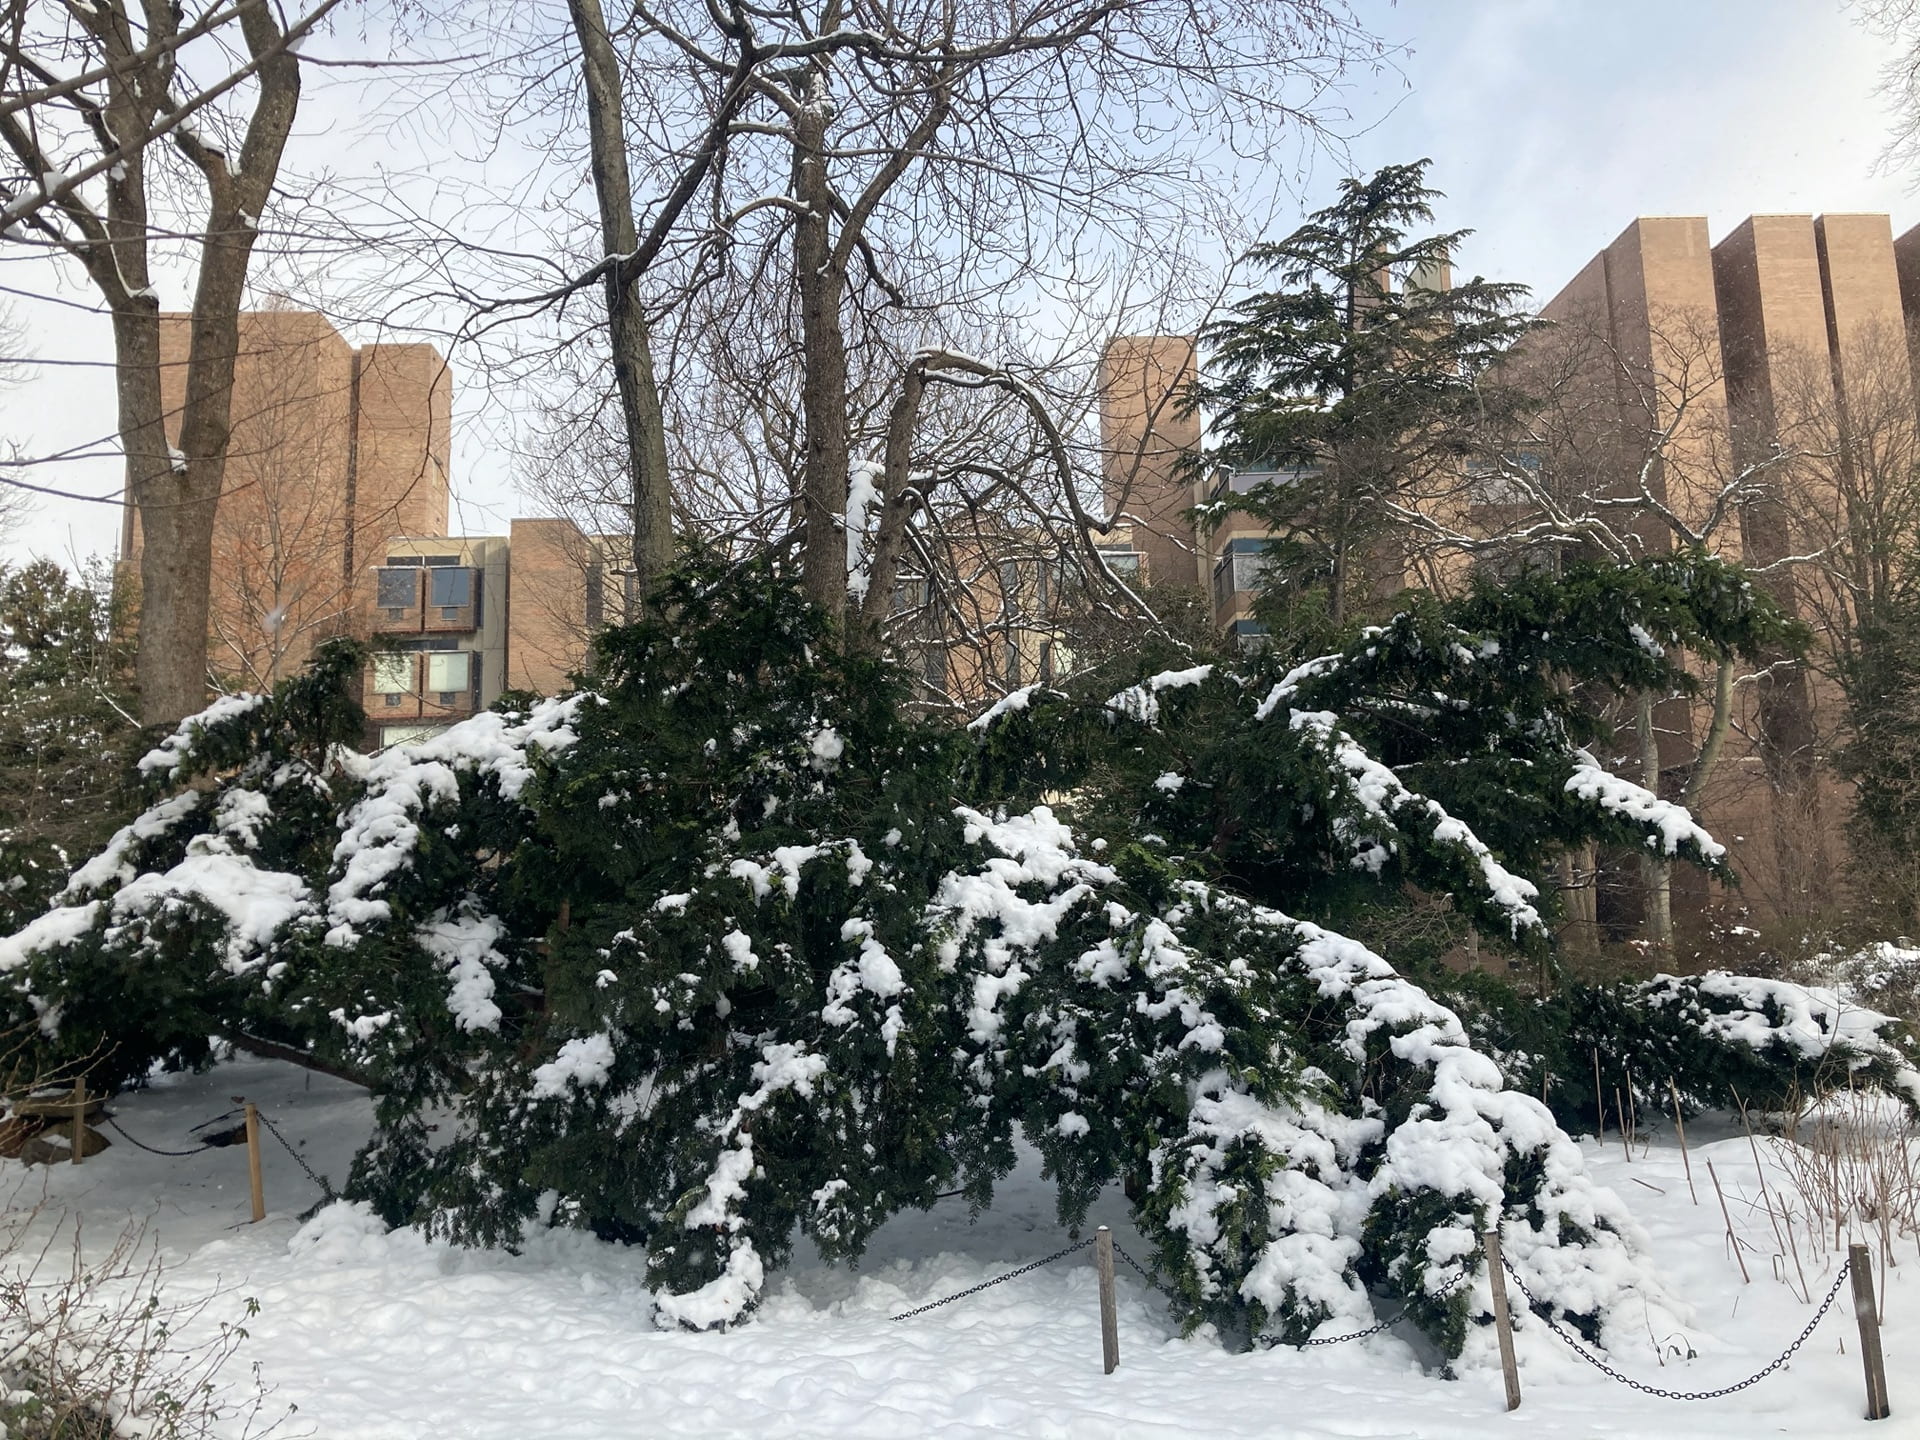 A snowy view of the Goddard Richards building, designed by Louis Kahn.